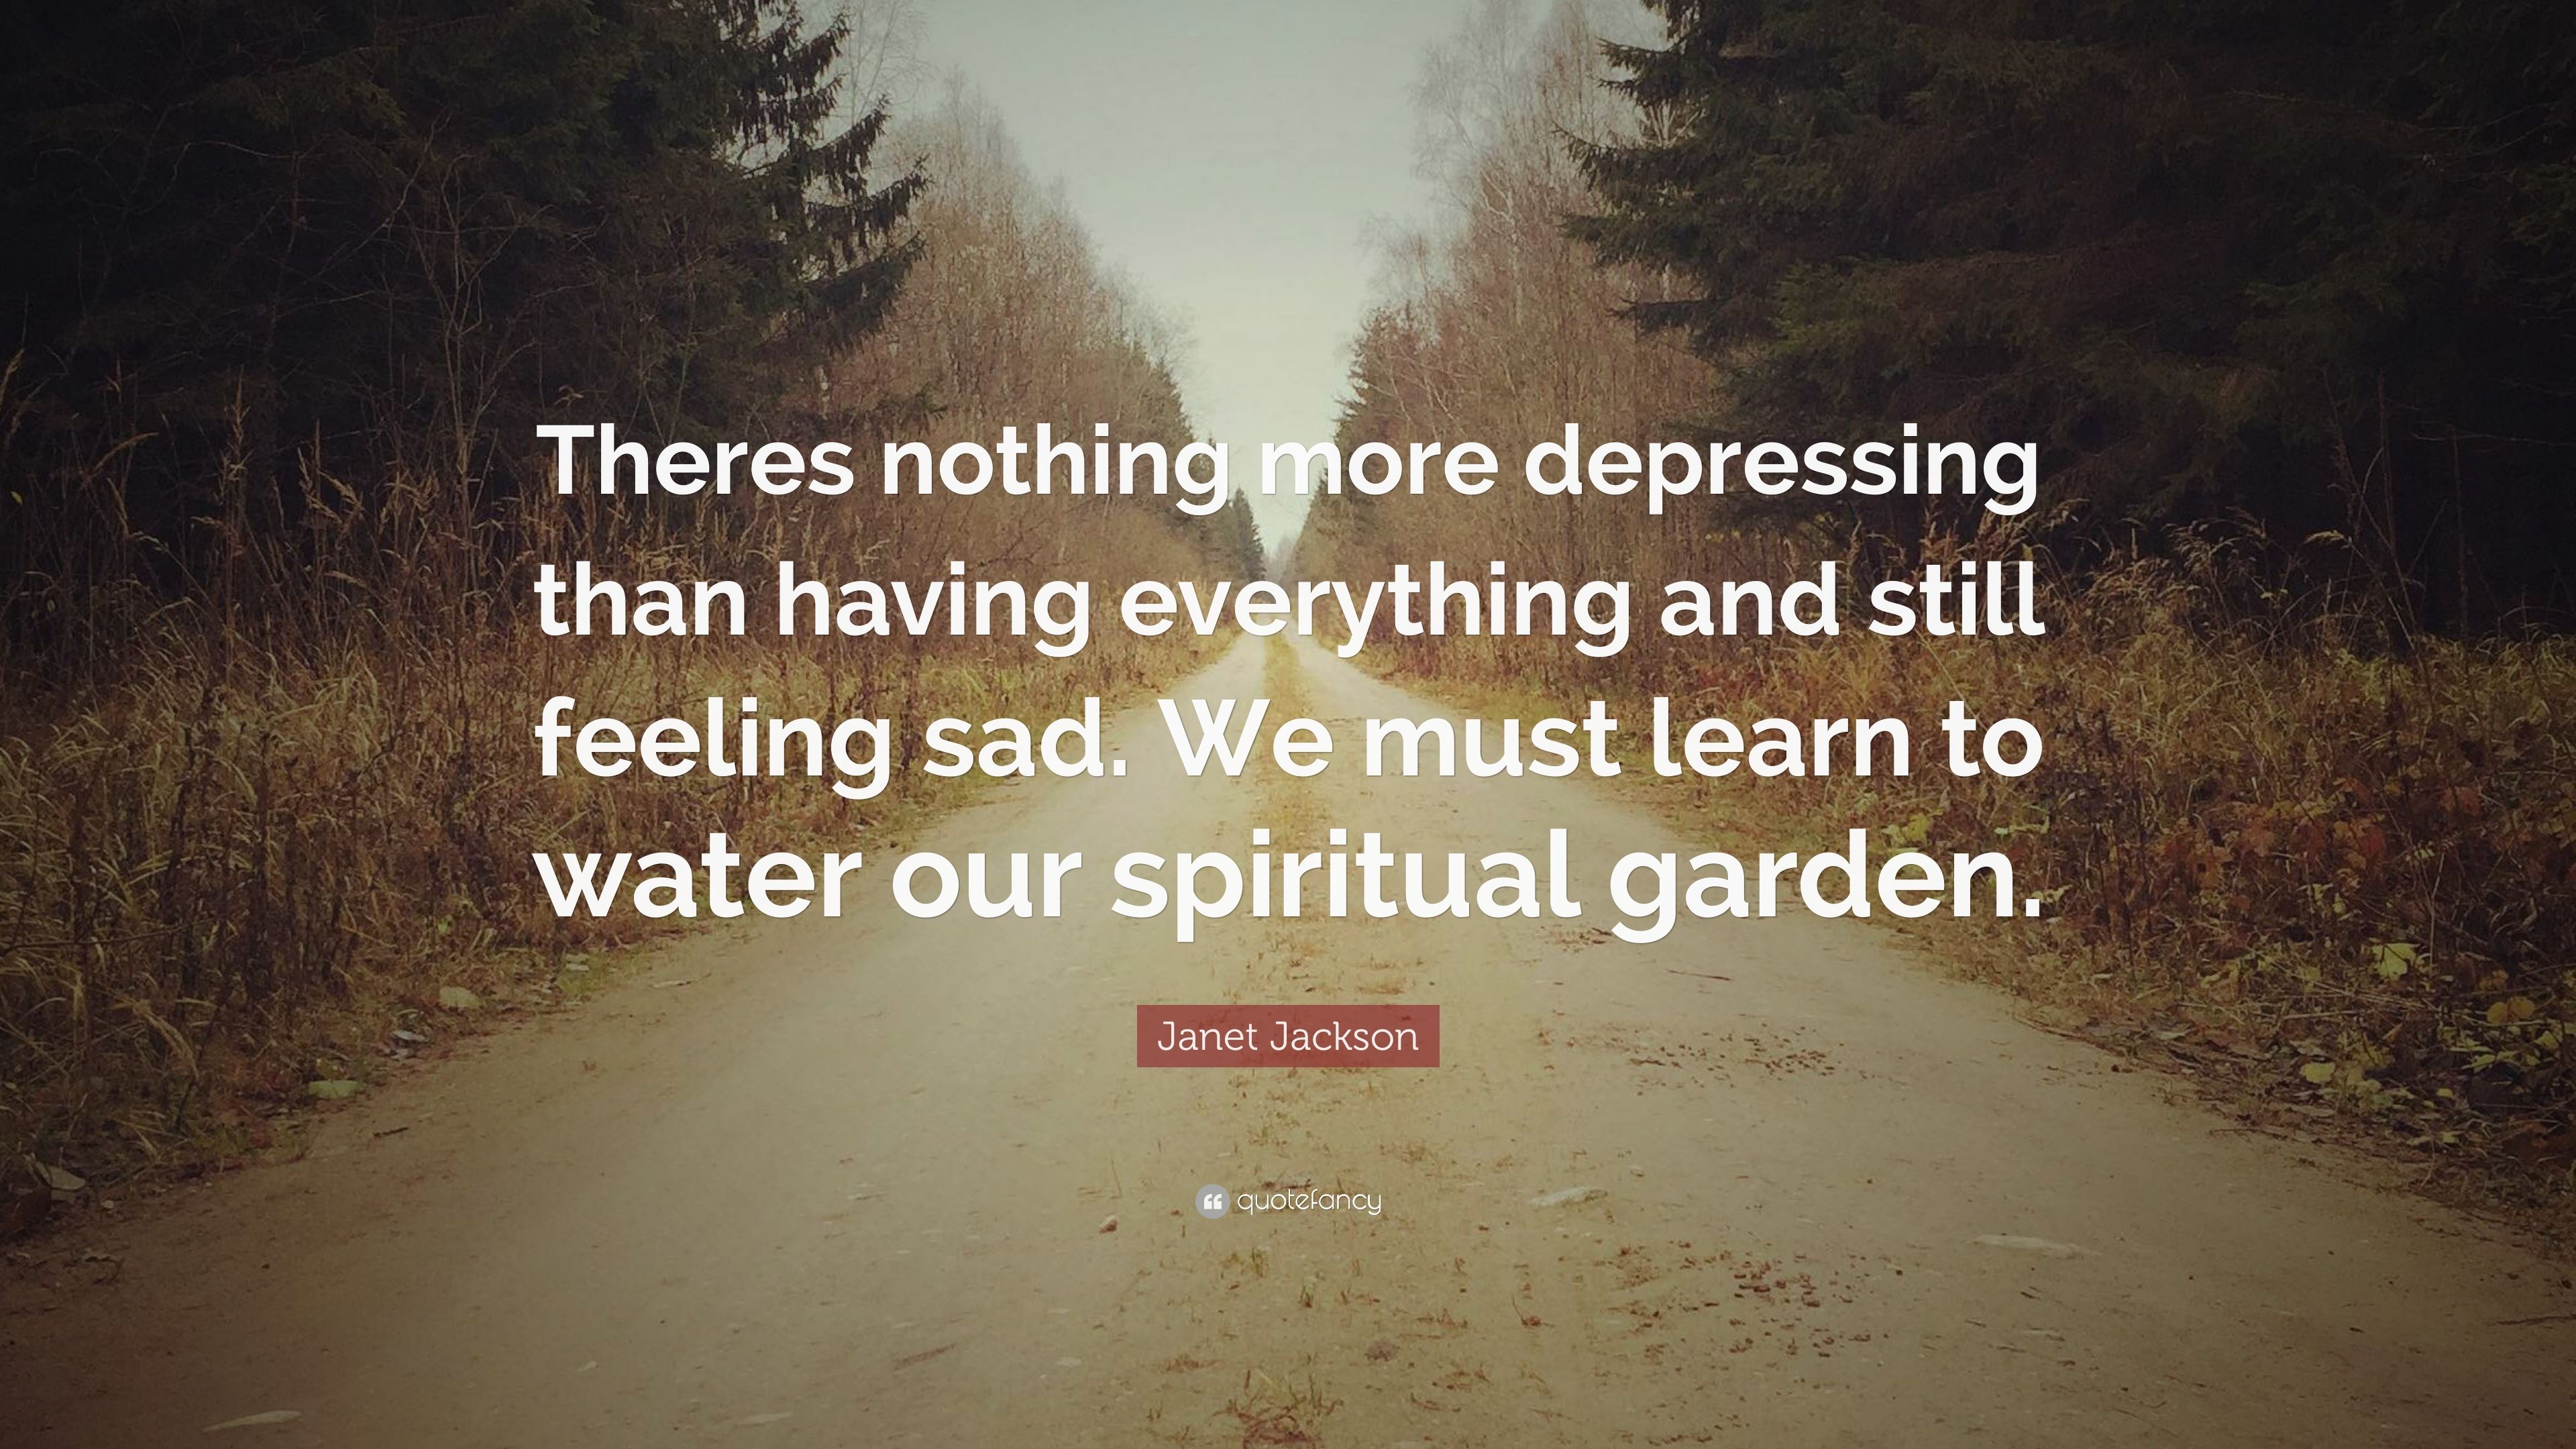 Janet Jackson Quote: “Theres nothing more depressing than having everything and still feeling sad. We must learn to water our spiritual garden.” (7 wallpaper)